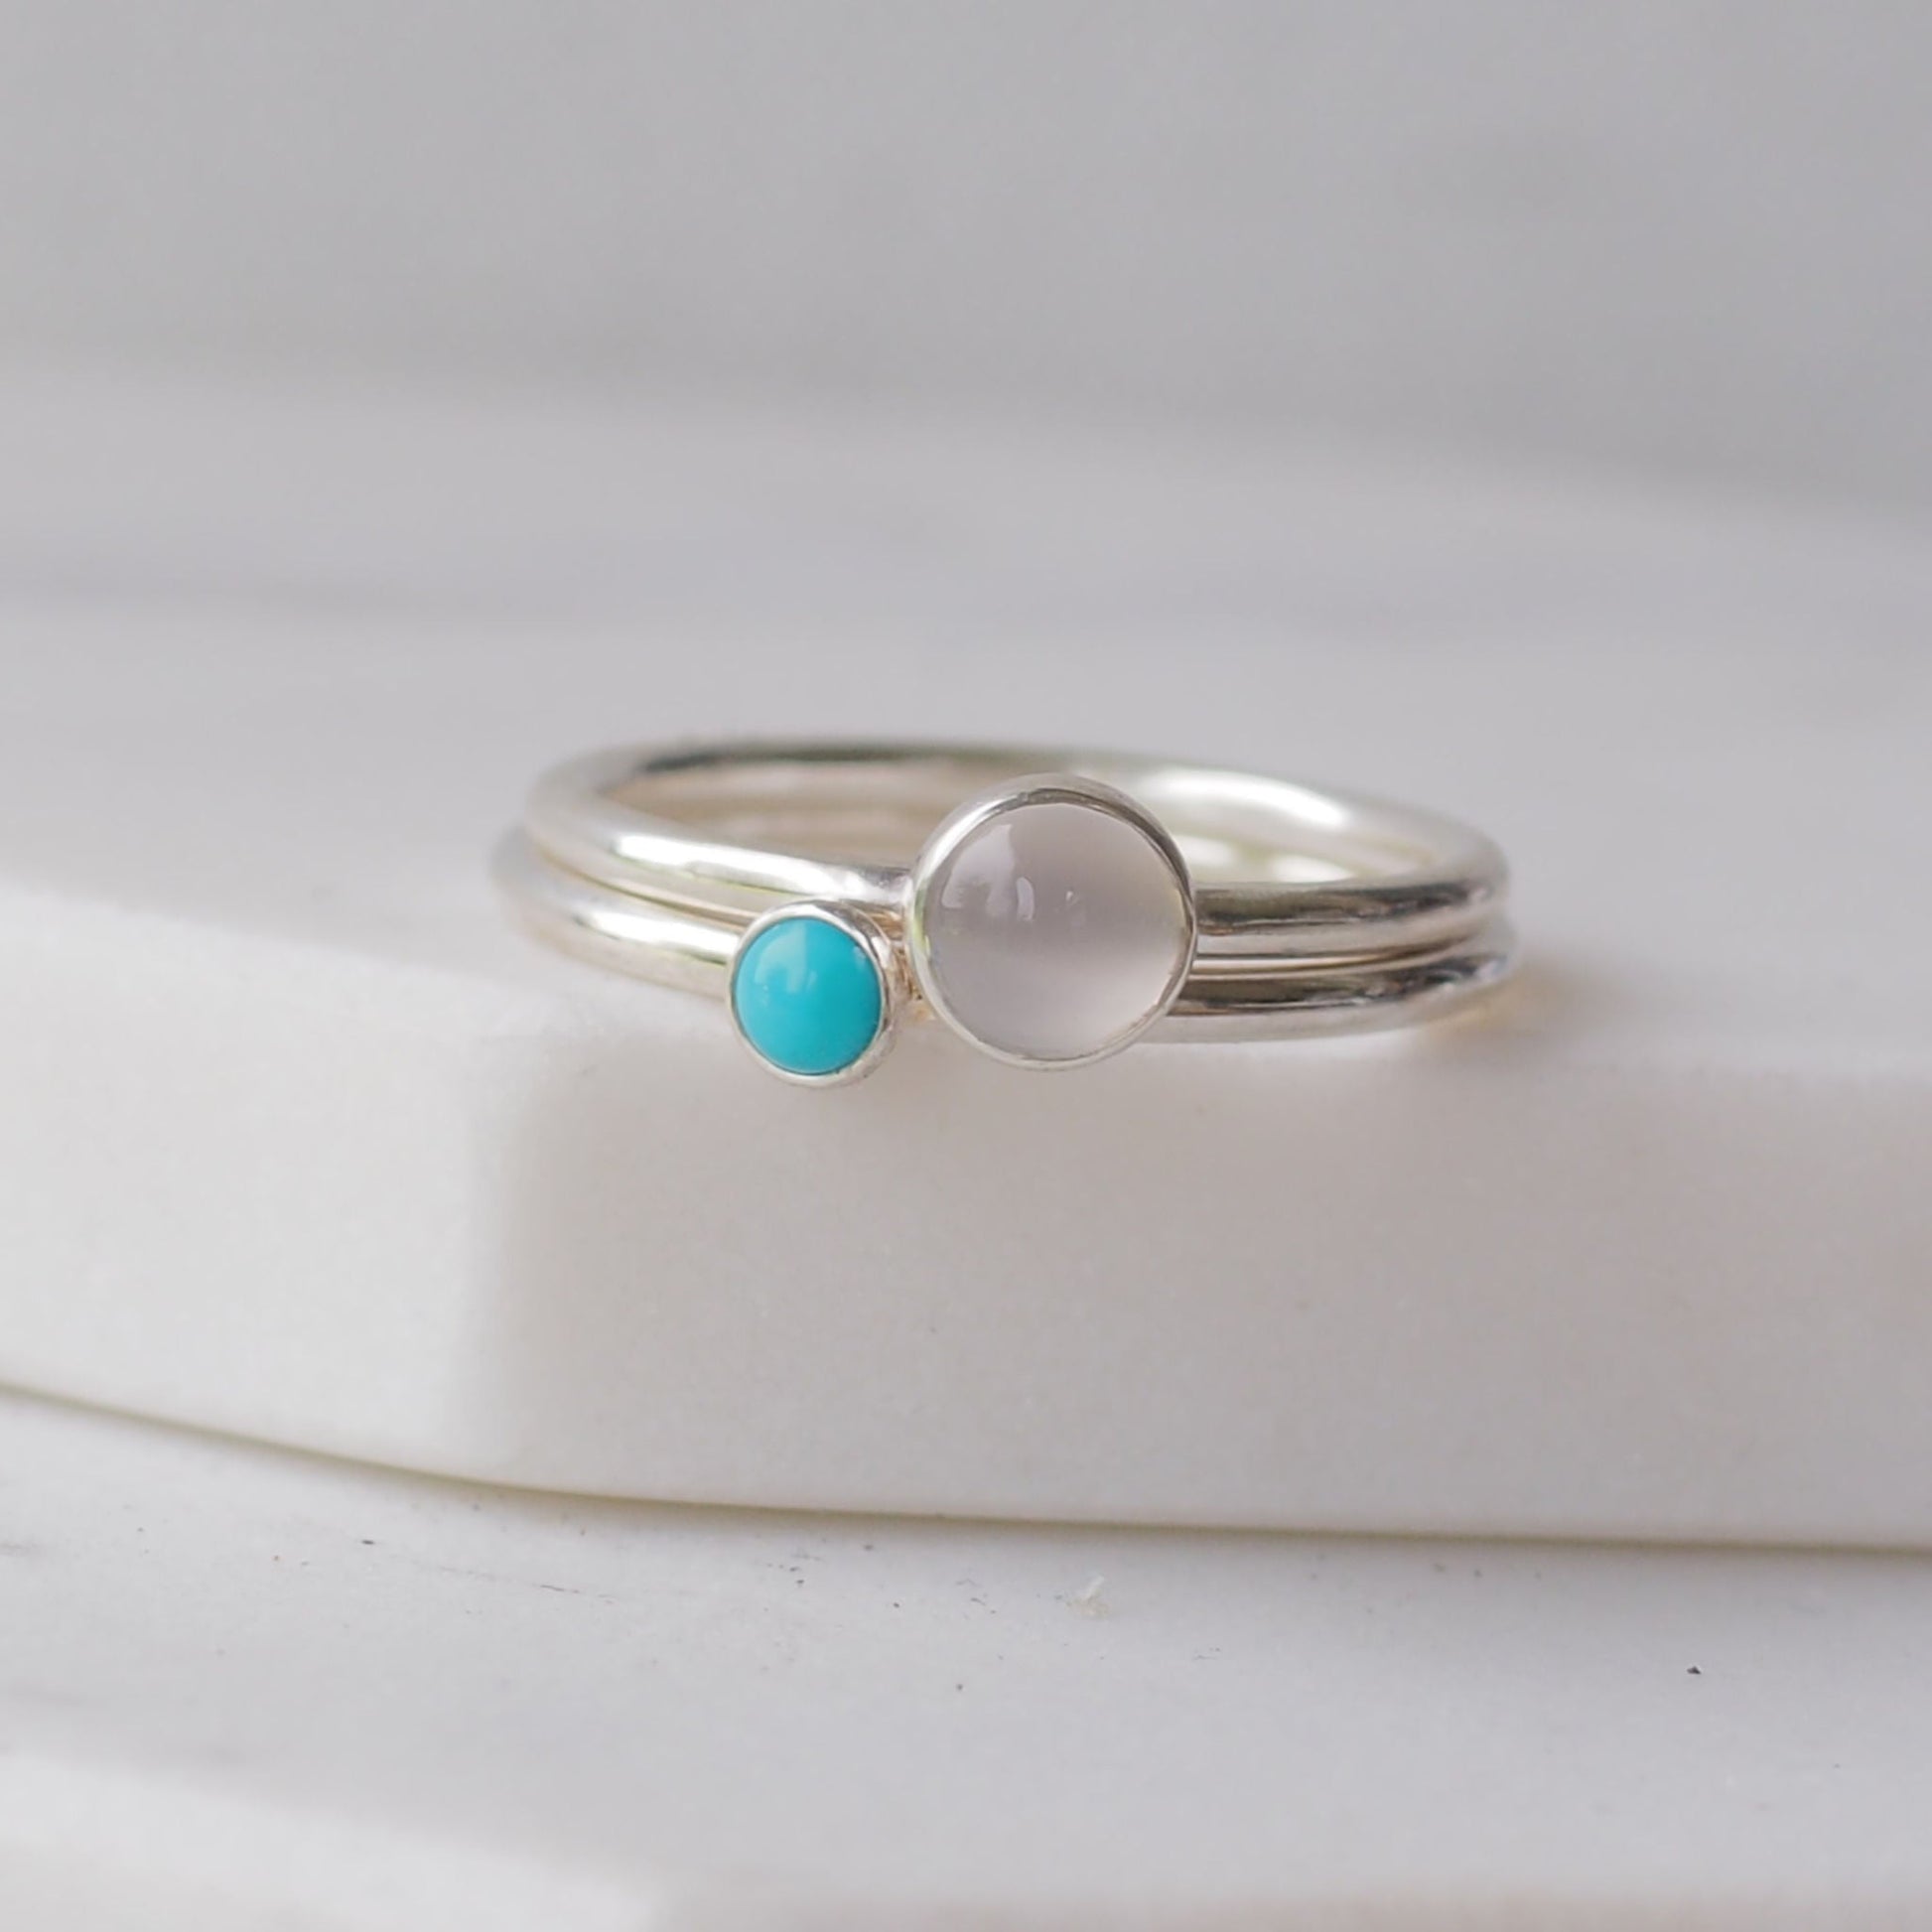 Two silver rings with moonstone and turquoise gemstones. Birthstones for June and December. Handmade to your ring size by maram jewellery in Scotland , UK